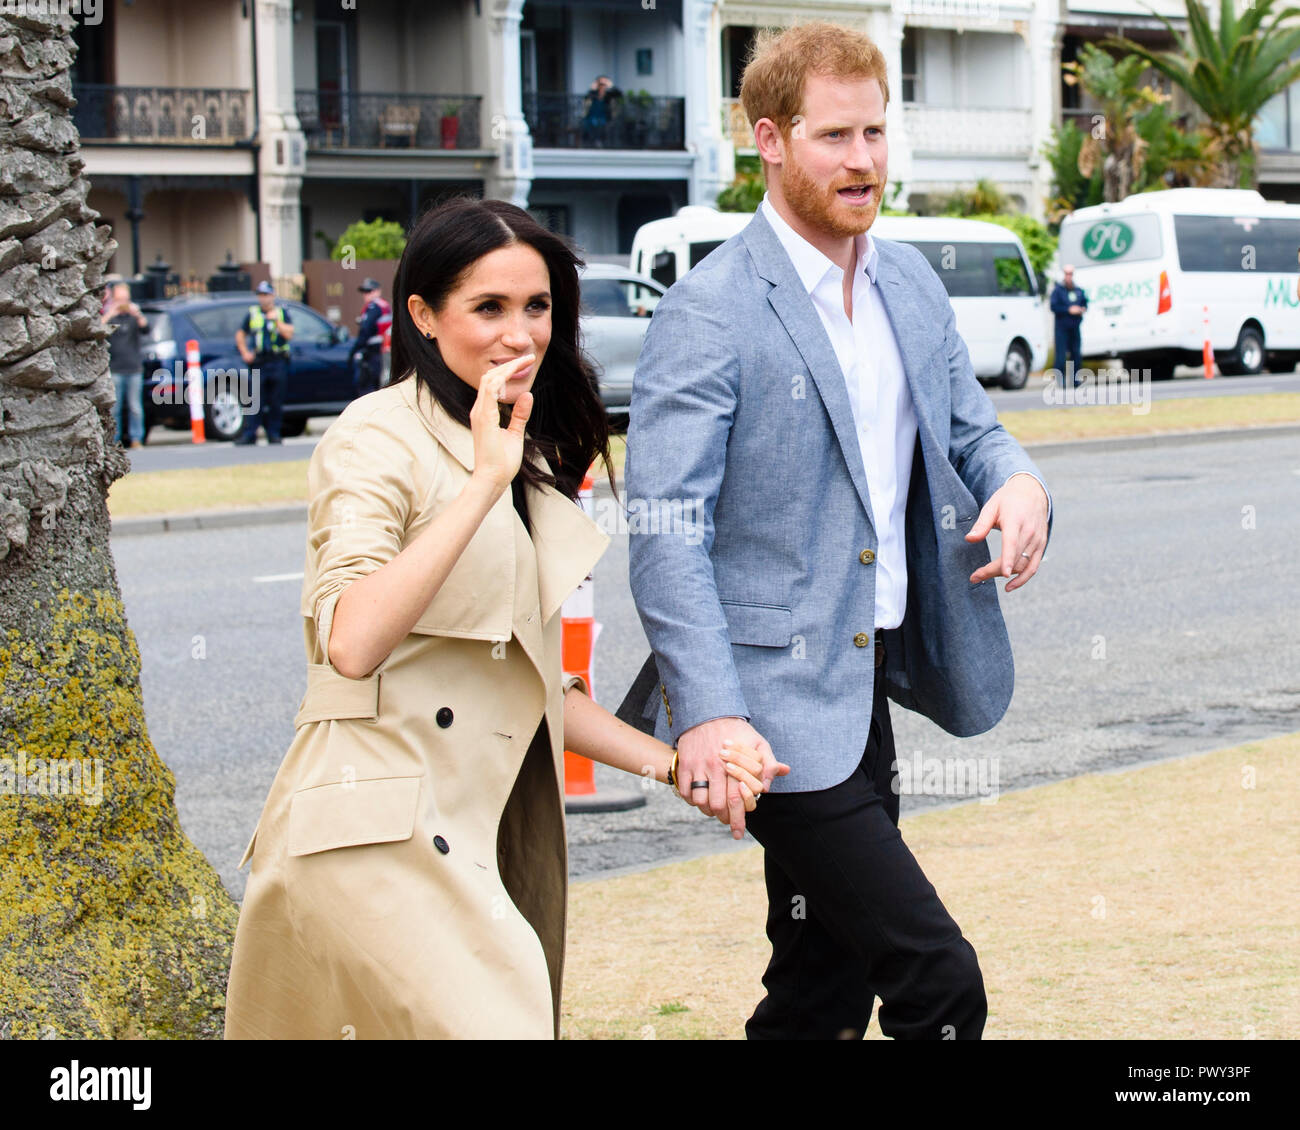 Melbourne, Australia. 18th Oct 2018. Duke and Duchess of Sussex visit Melbourne, Australia 18 Oct 2018 Credit: Robyn Charnley/Alamy Live News Stock Photo